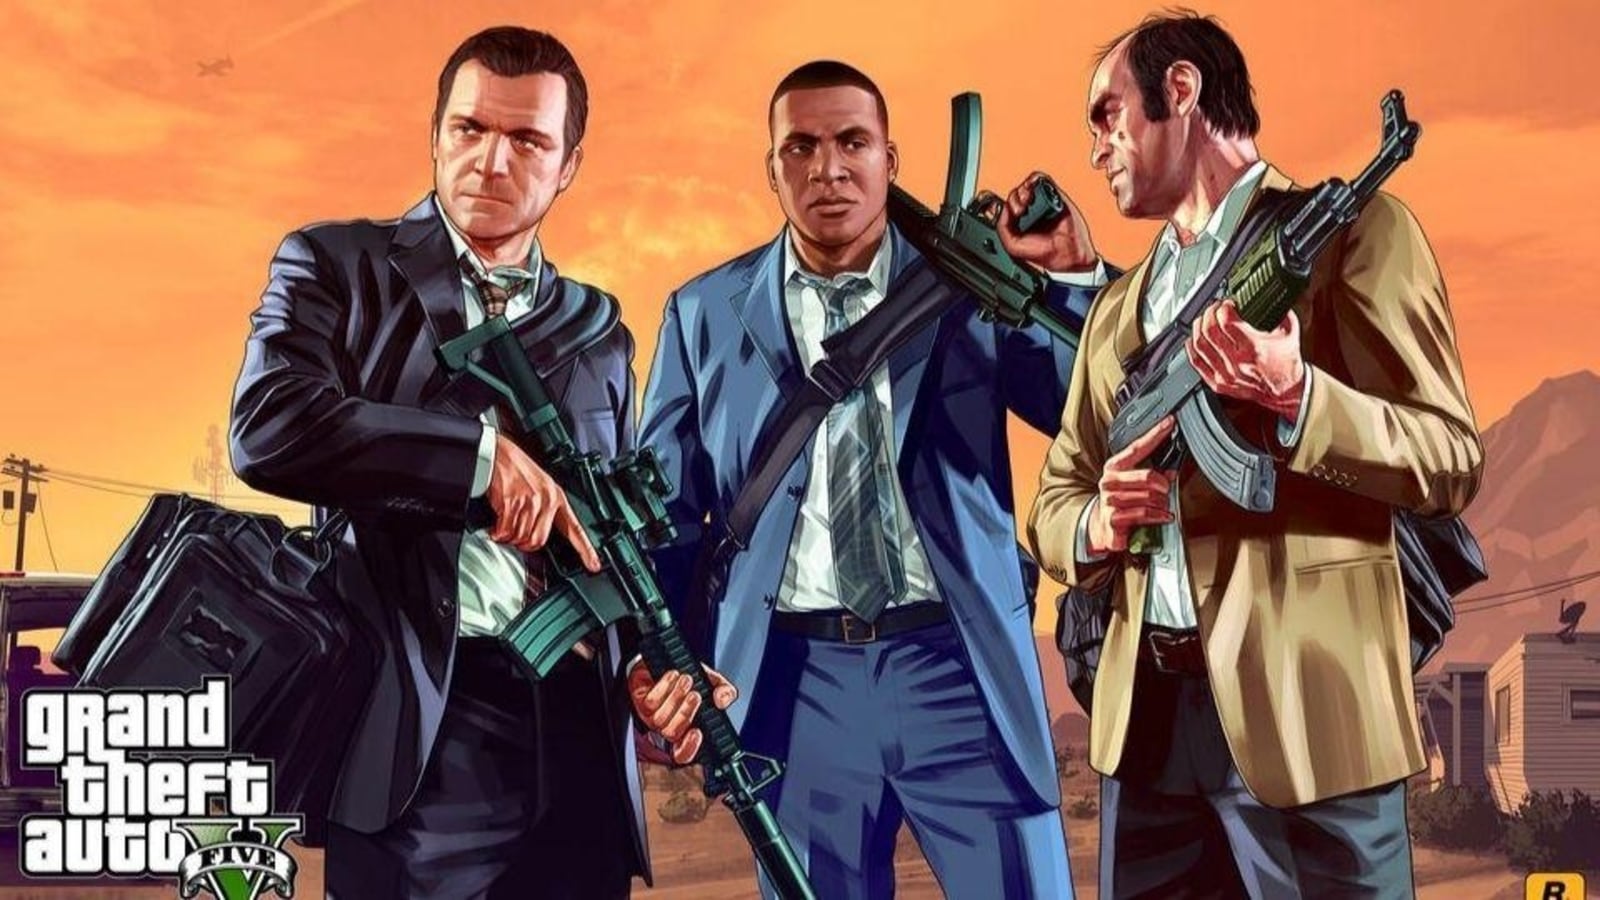 Cheats for all GTA - Apps on Google Play